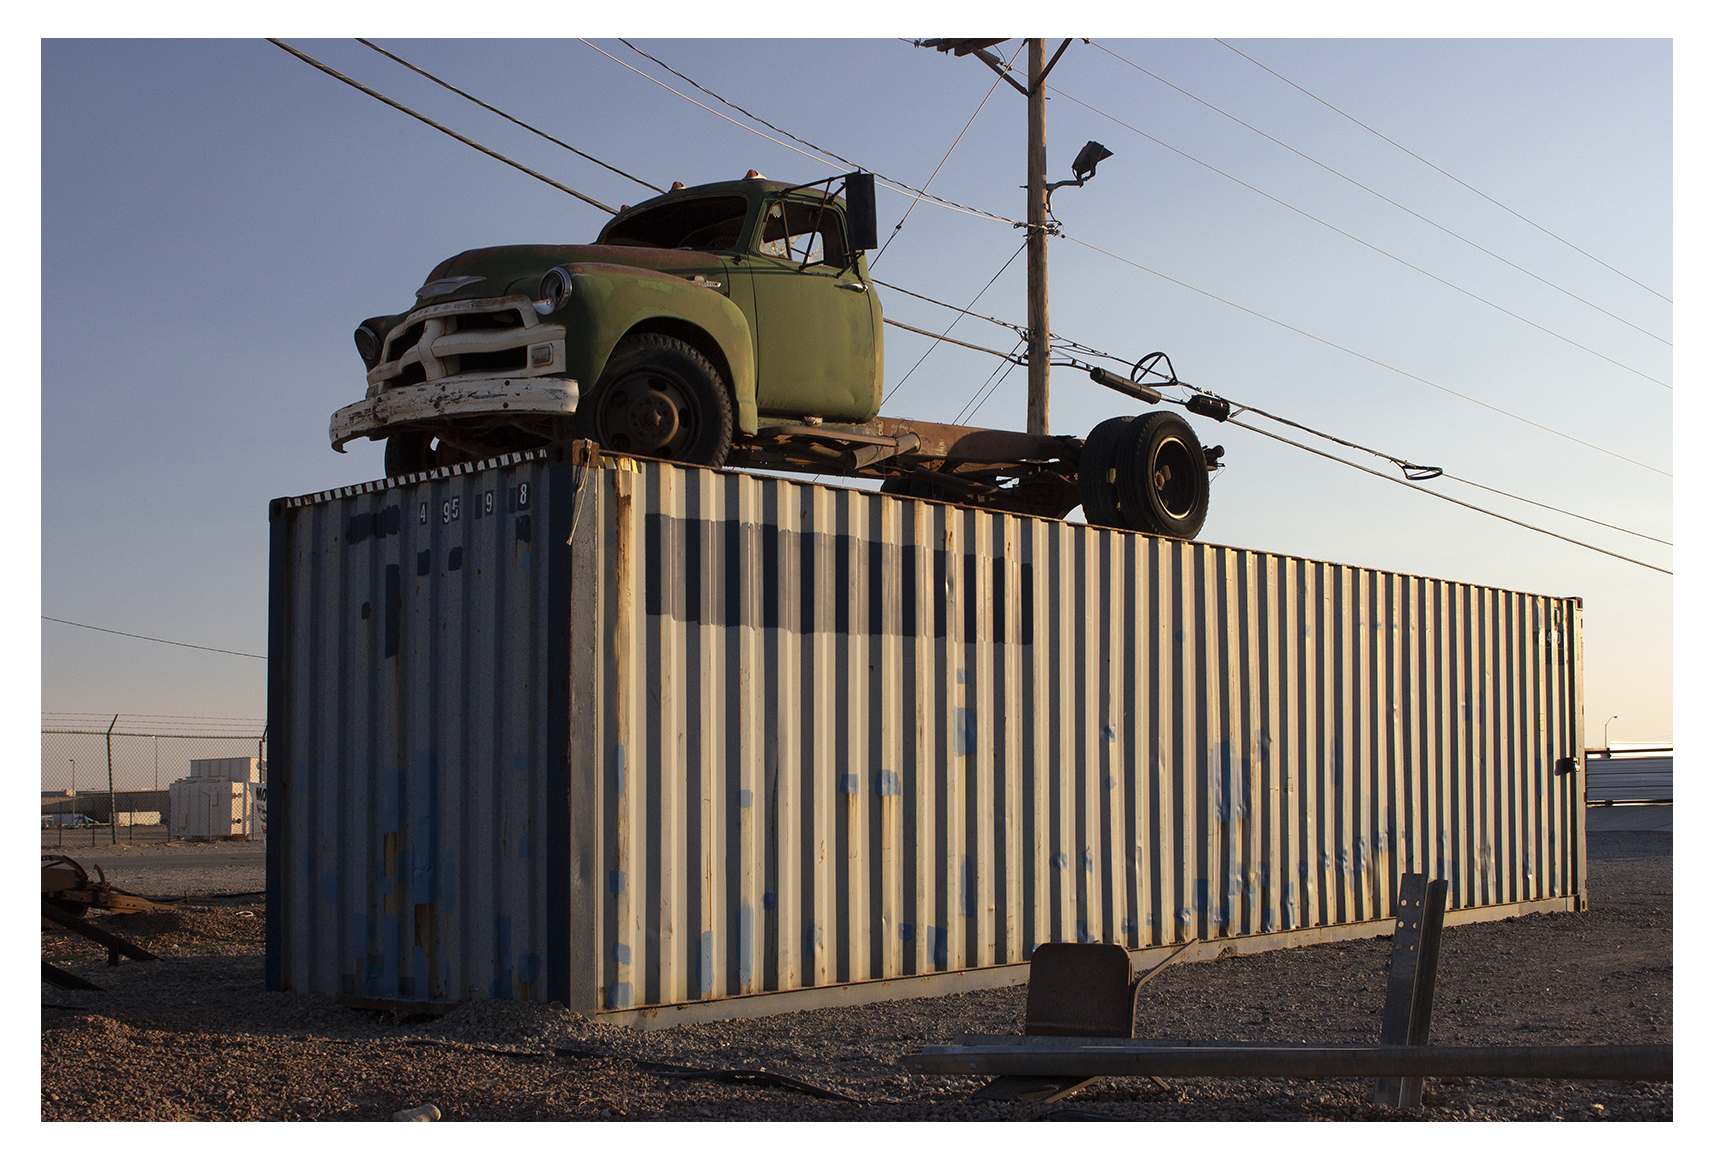 Americana, Funk, Texas, Old Cars, Containers, West Texas, Advertising, Sweet Light